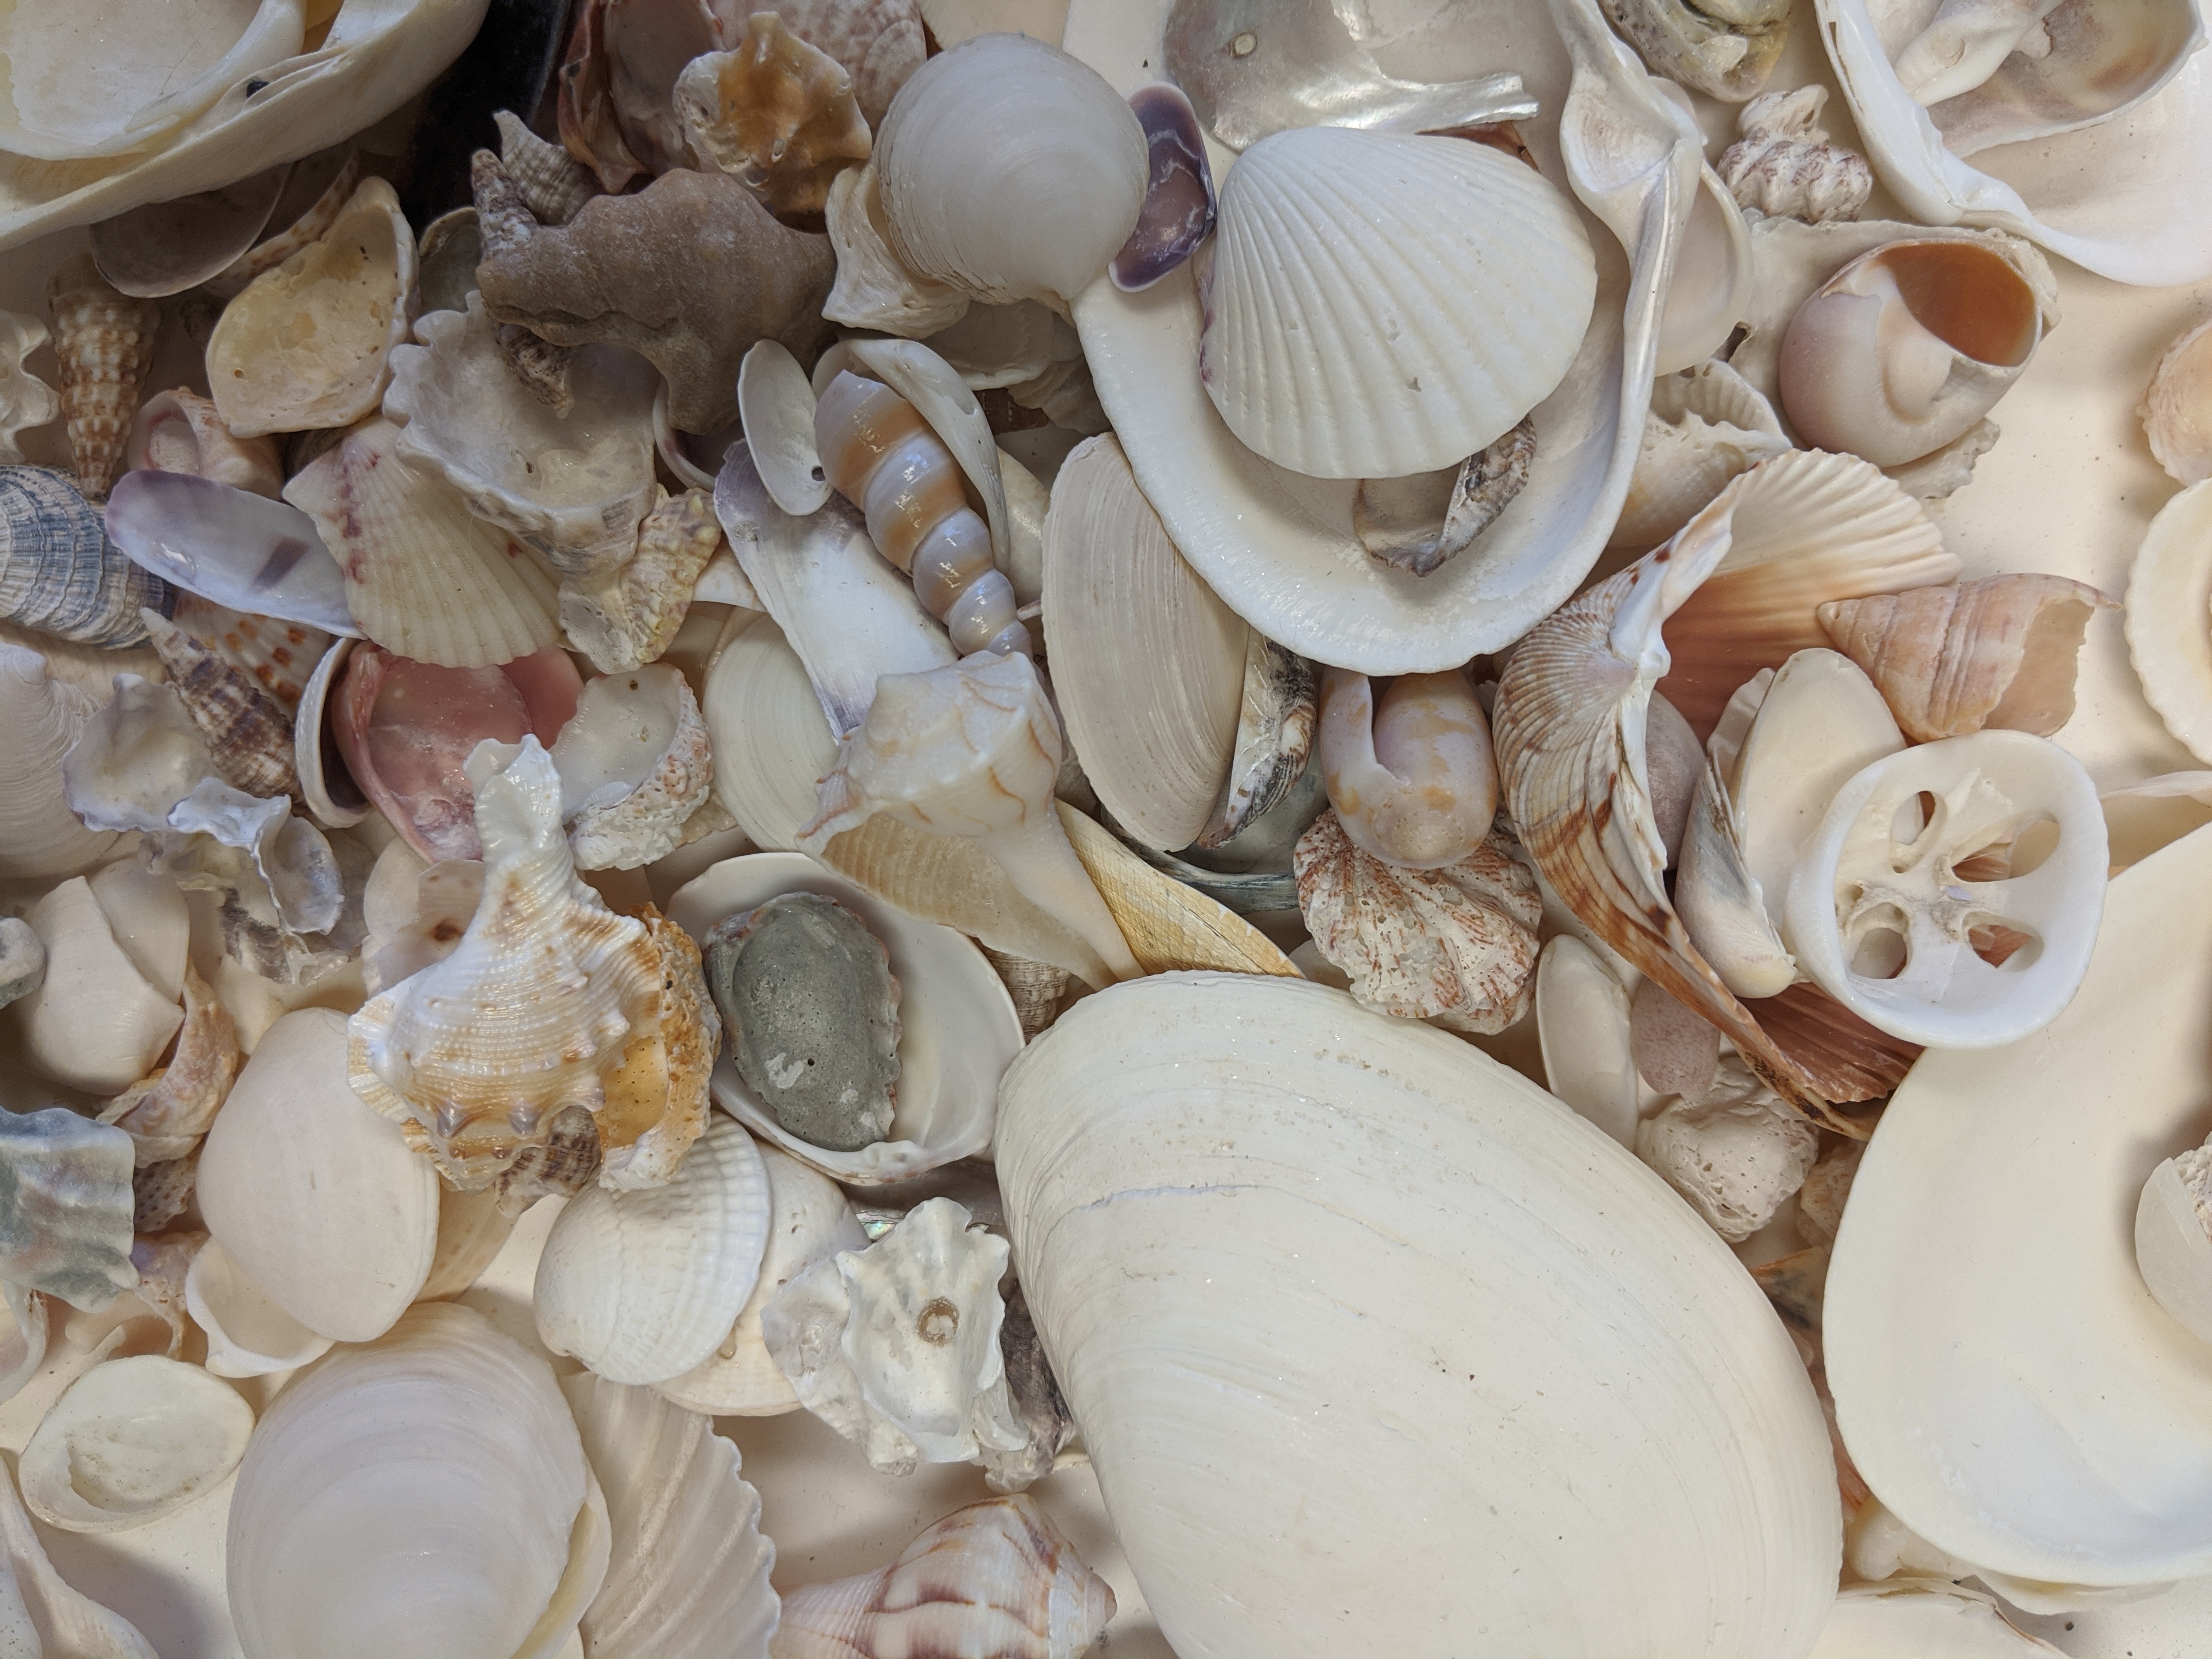 A pile of shells from different types of sea creature.